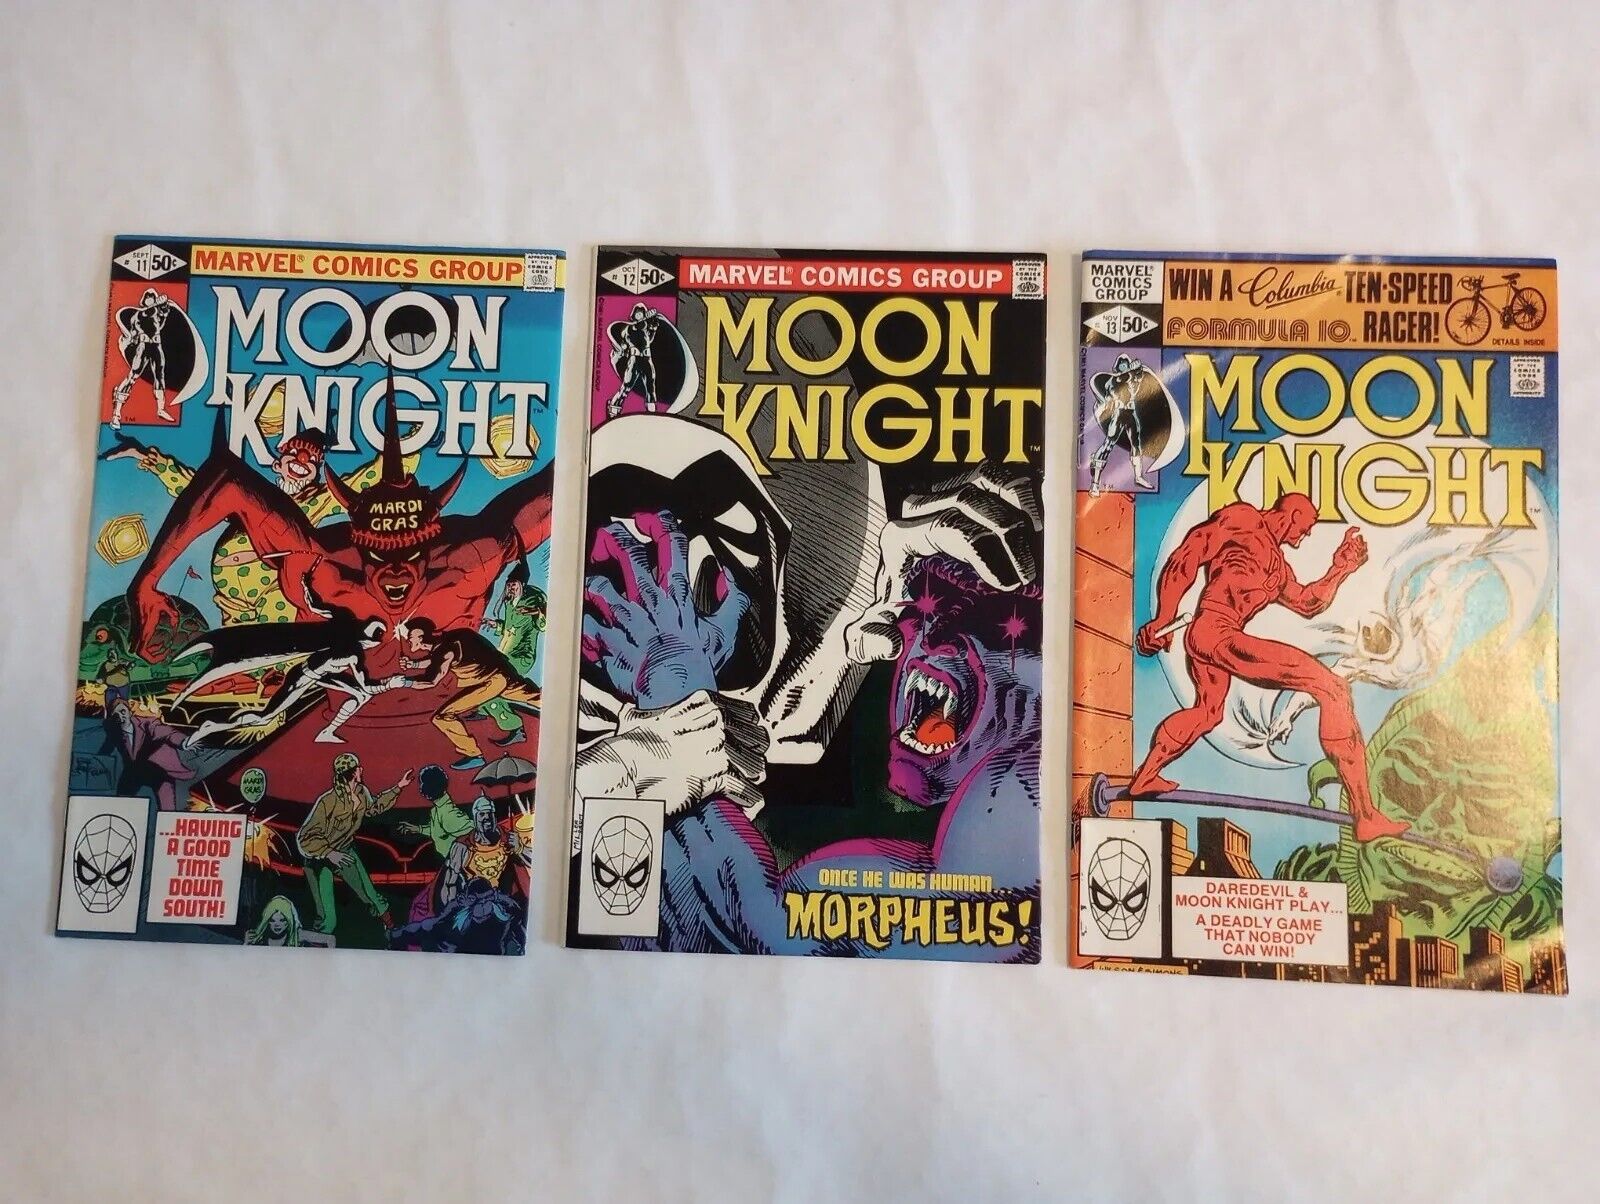 Moon night #11,12,13 1981 KEY🔑 1st Appearance of Morpheus Good Condition 